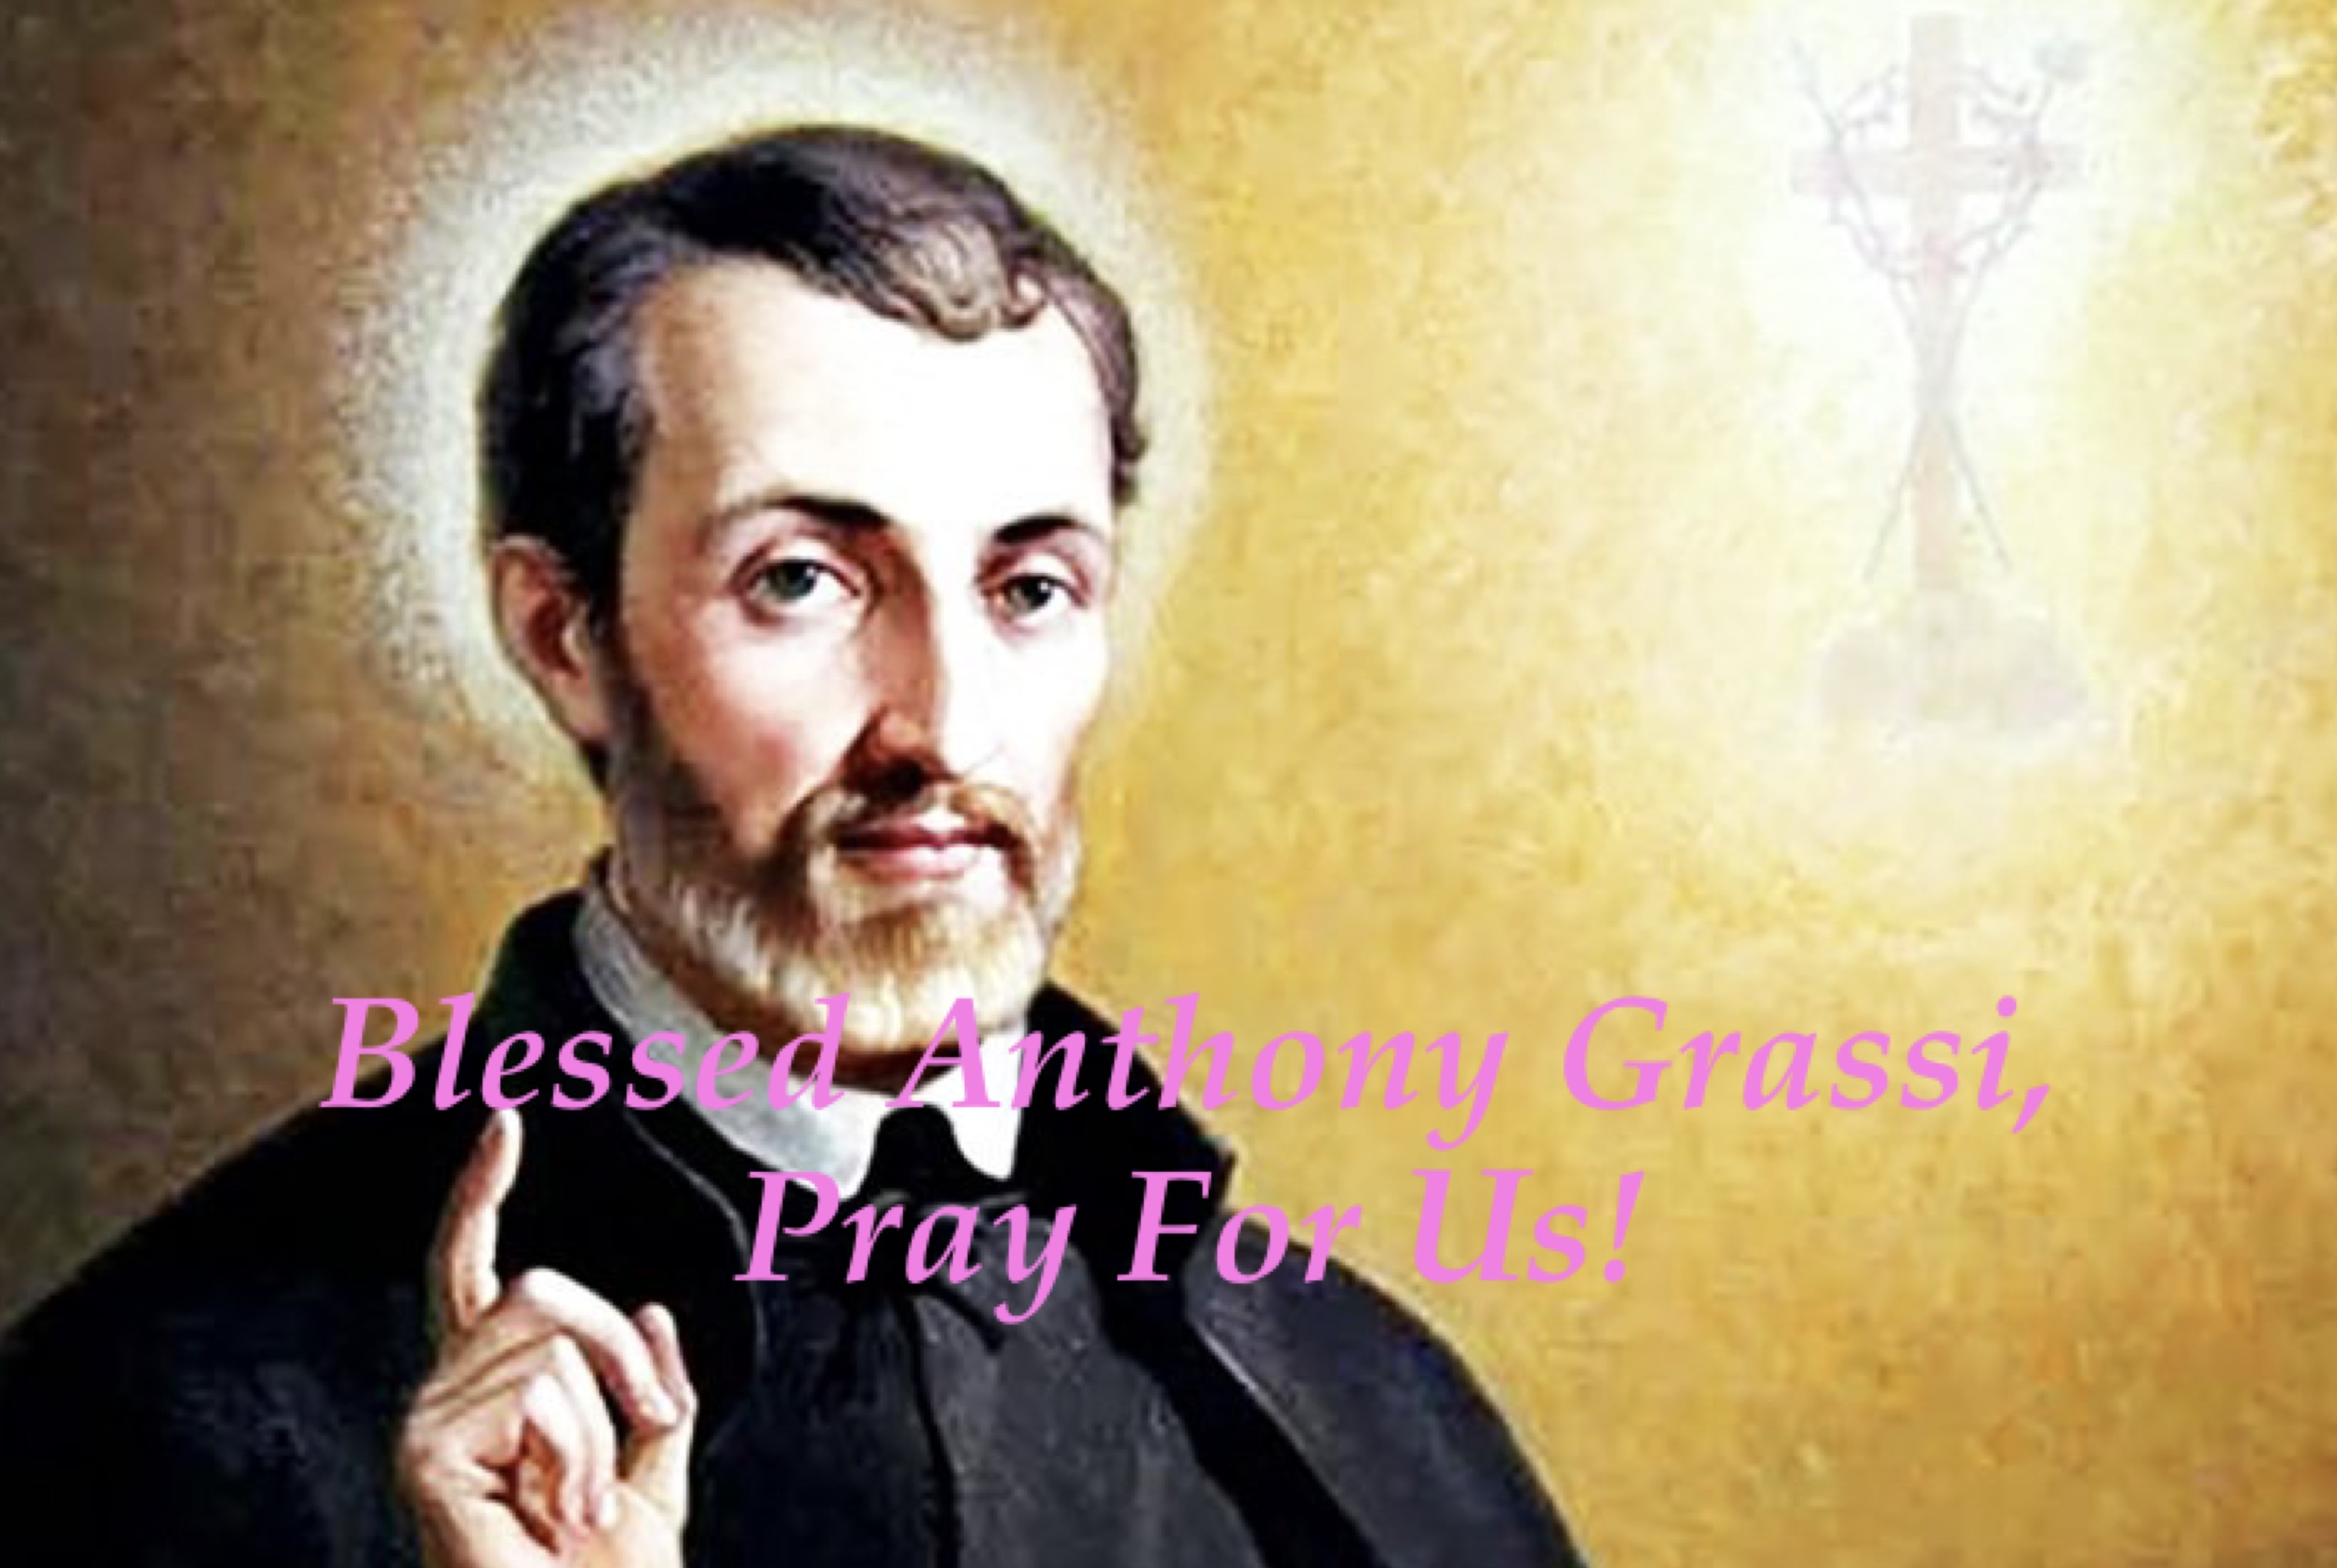 18th December - Blessed Anthony Grassi